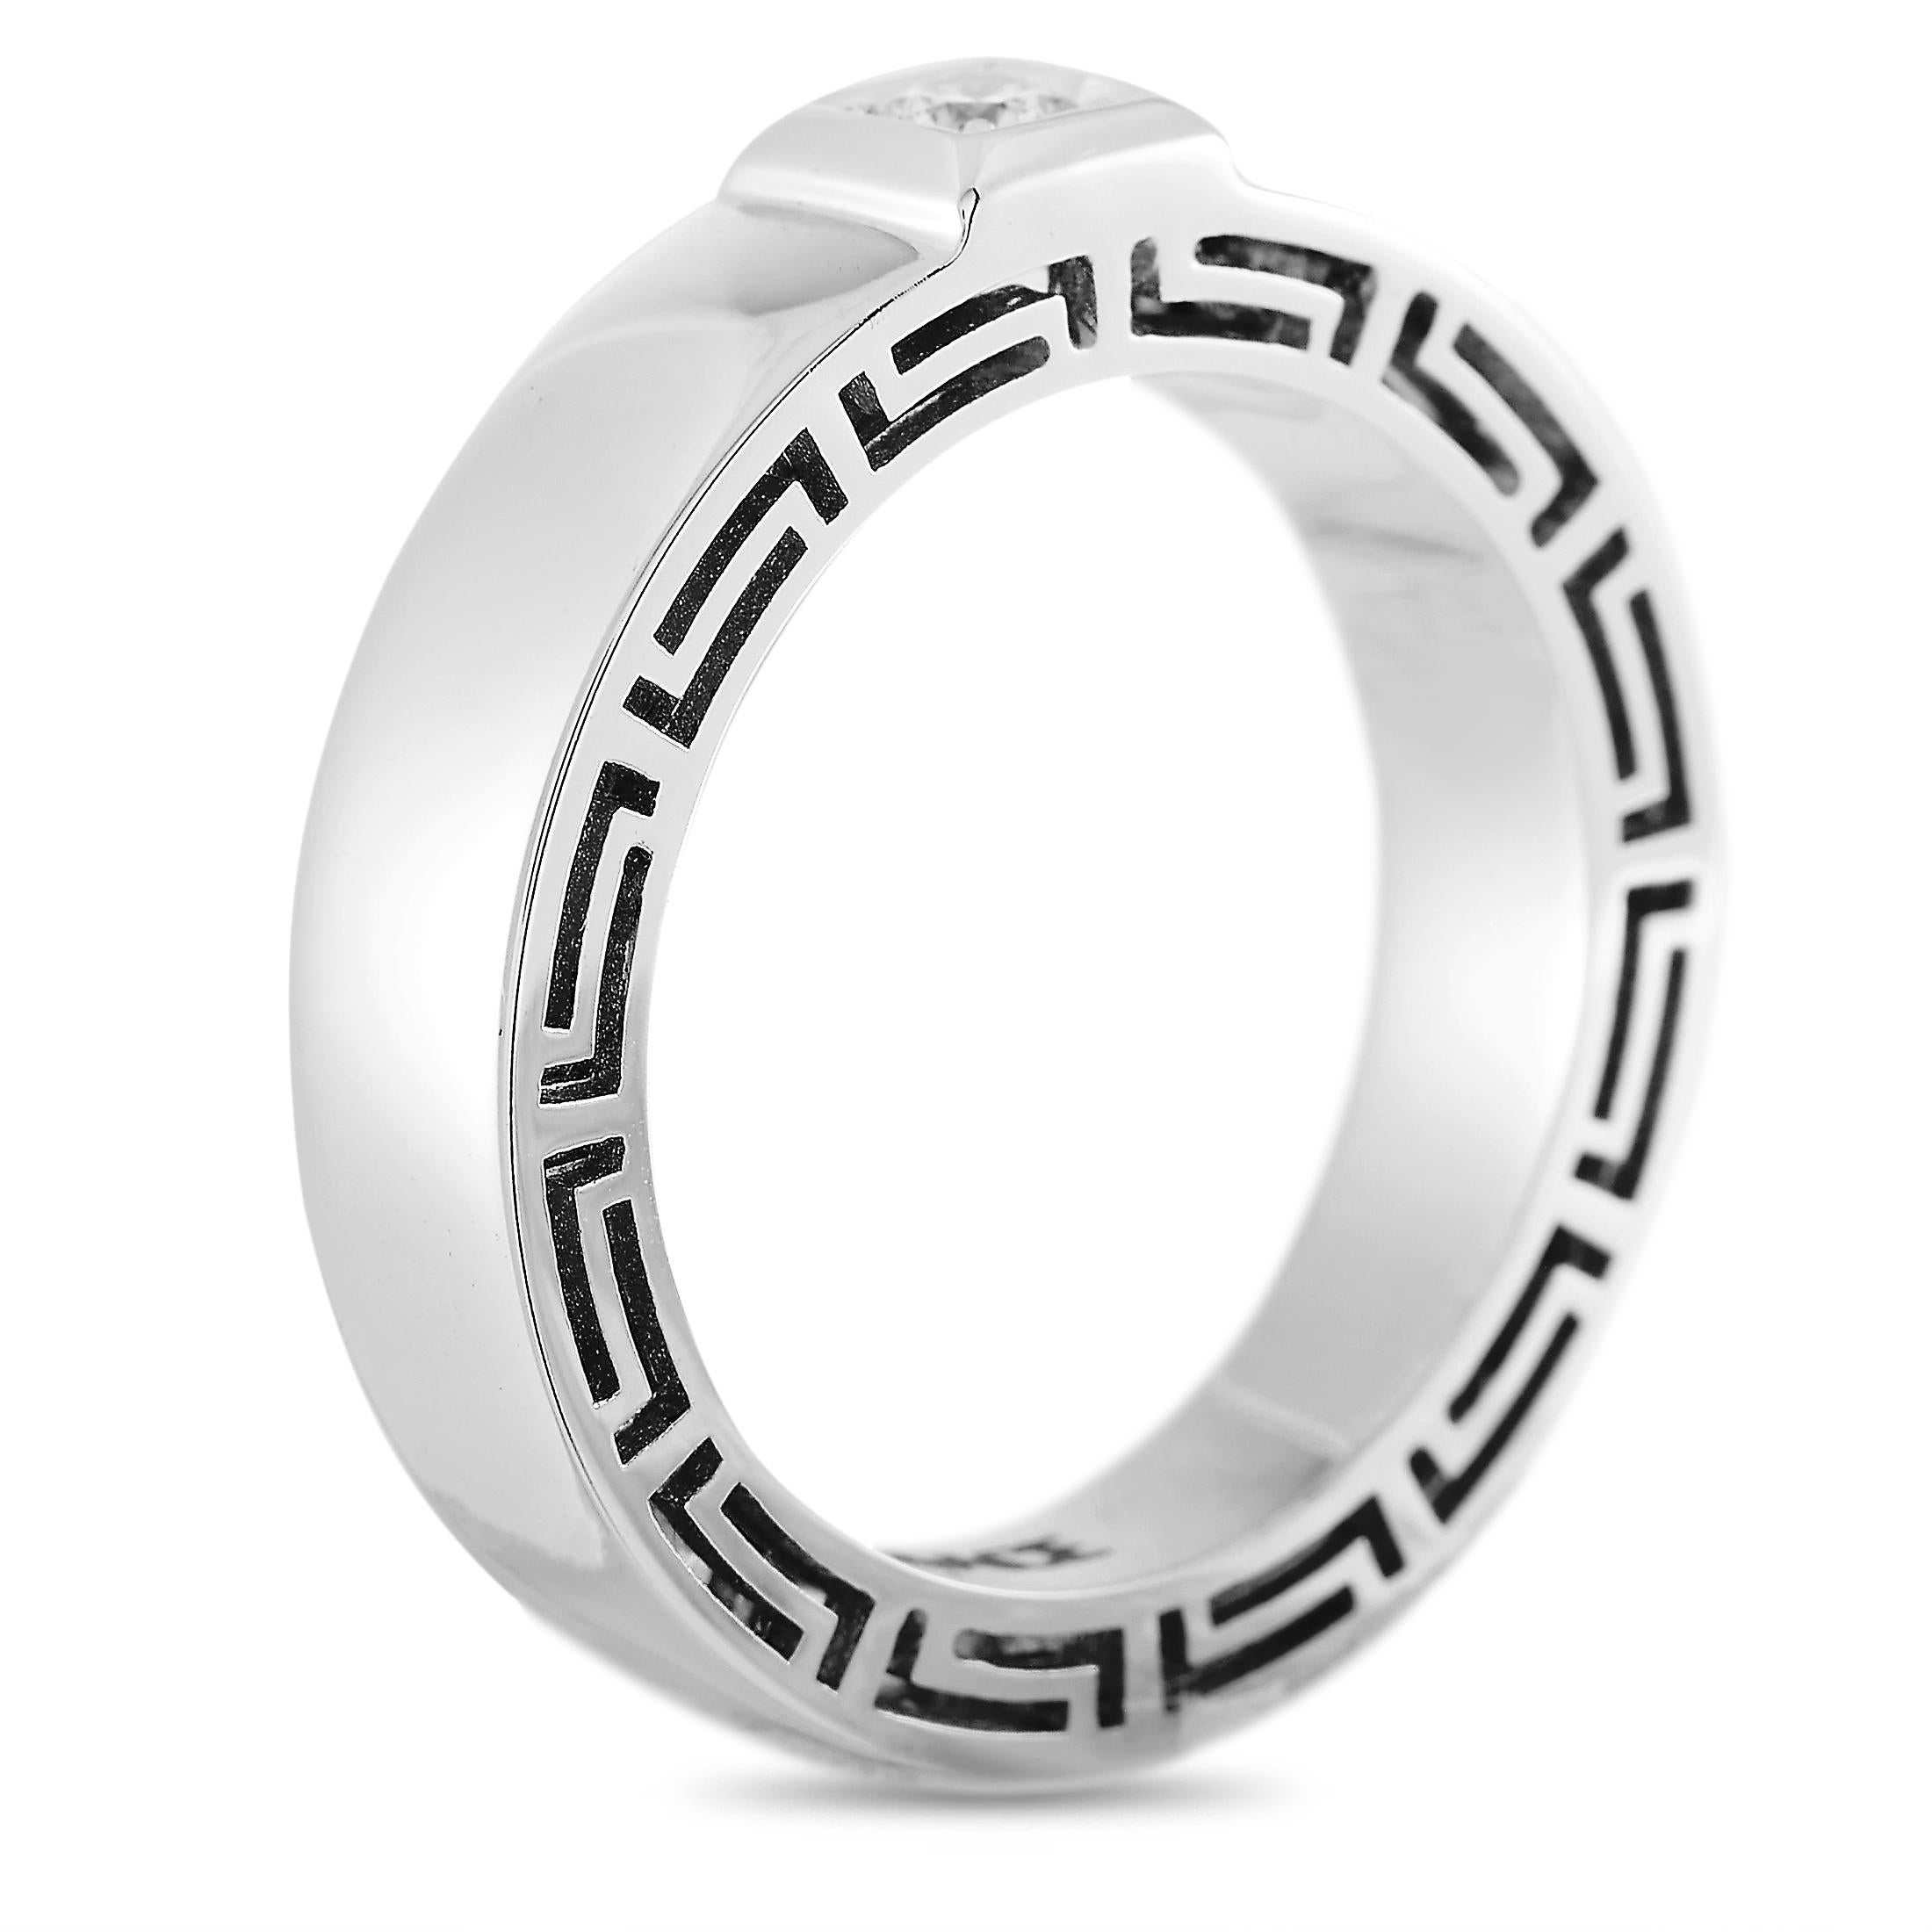 This Versace ring is made of 18K white gold and set with a 0.15 ct diamond stone. The ring weighs 9.6 grams and boasts band thickness of 4 mm and top height of 5 mm, while top dimensions measure 6 by 5 mm.
 
 Offered in brand new condition, this